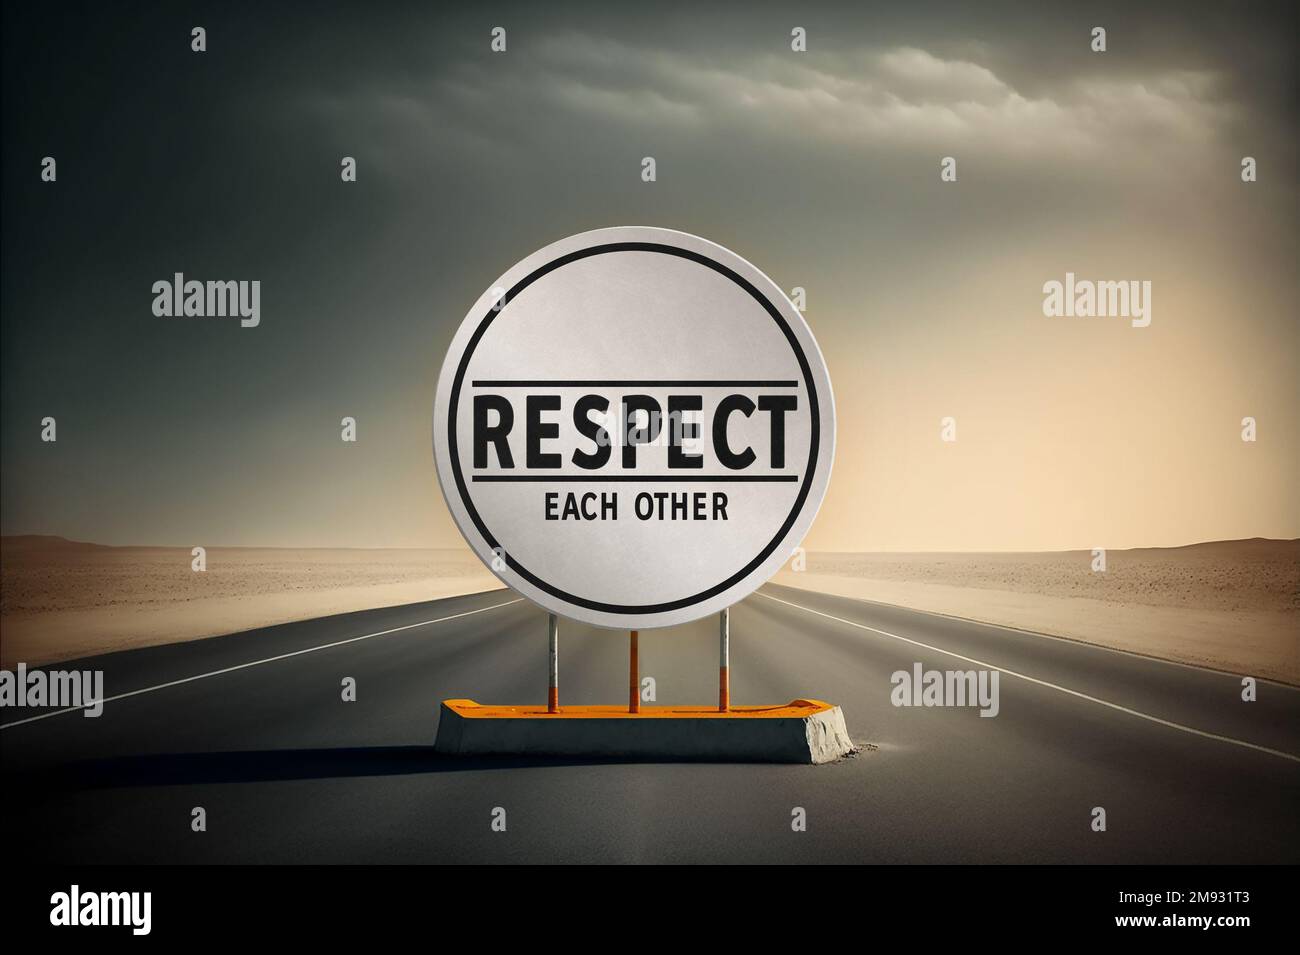 Respect - Road sign message Stock Photo